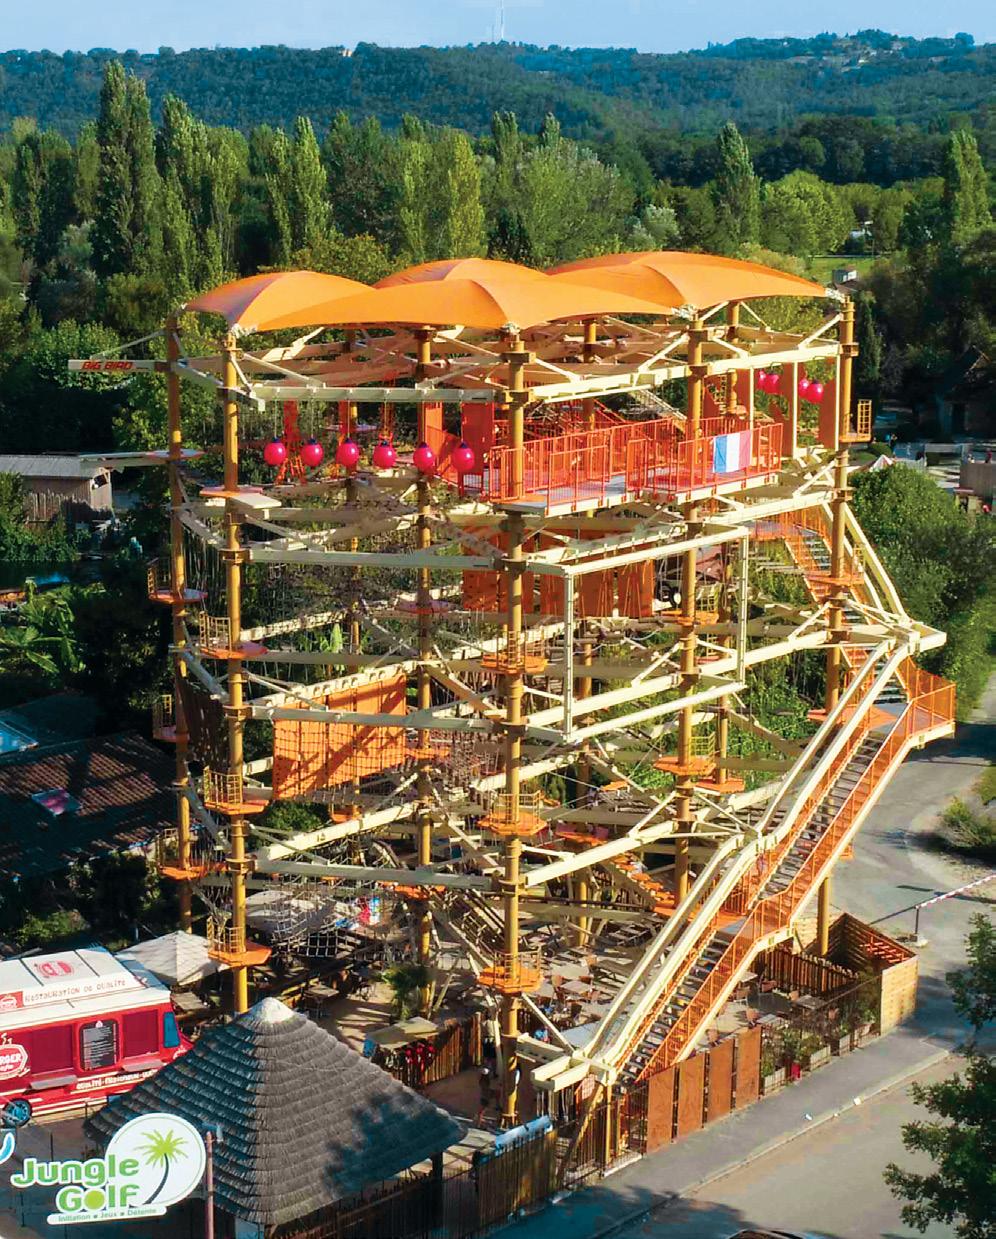 Ropetopia The Thrill of Heights ROPETOPIA ROPES COURSES Ropetopia is specialized in design, engineering and production of aerial adventure courses.